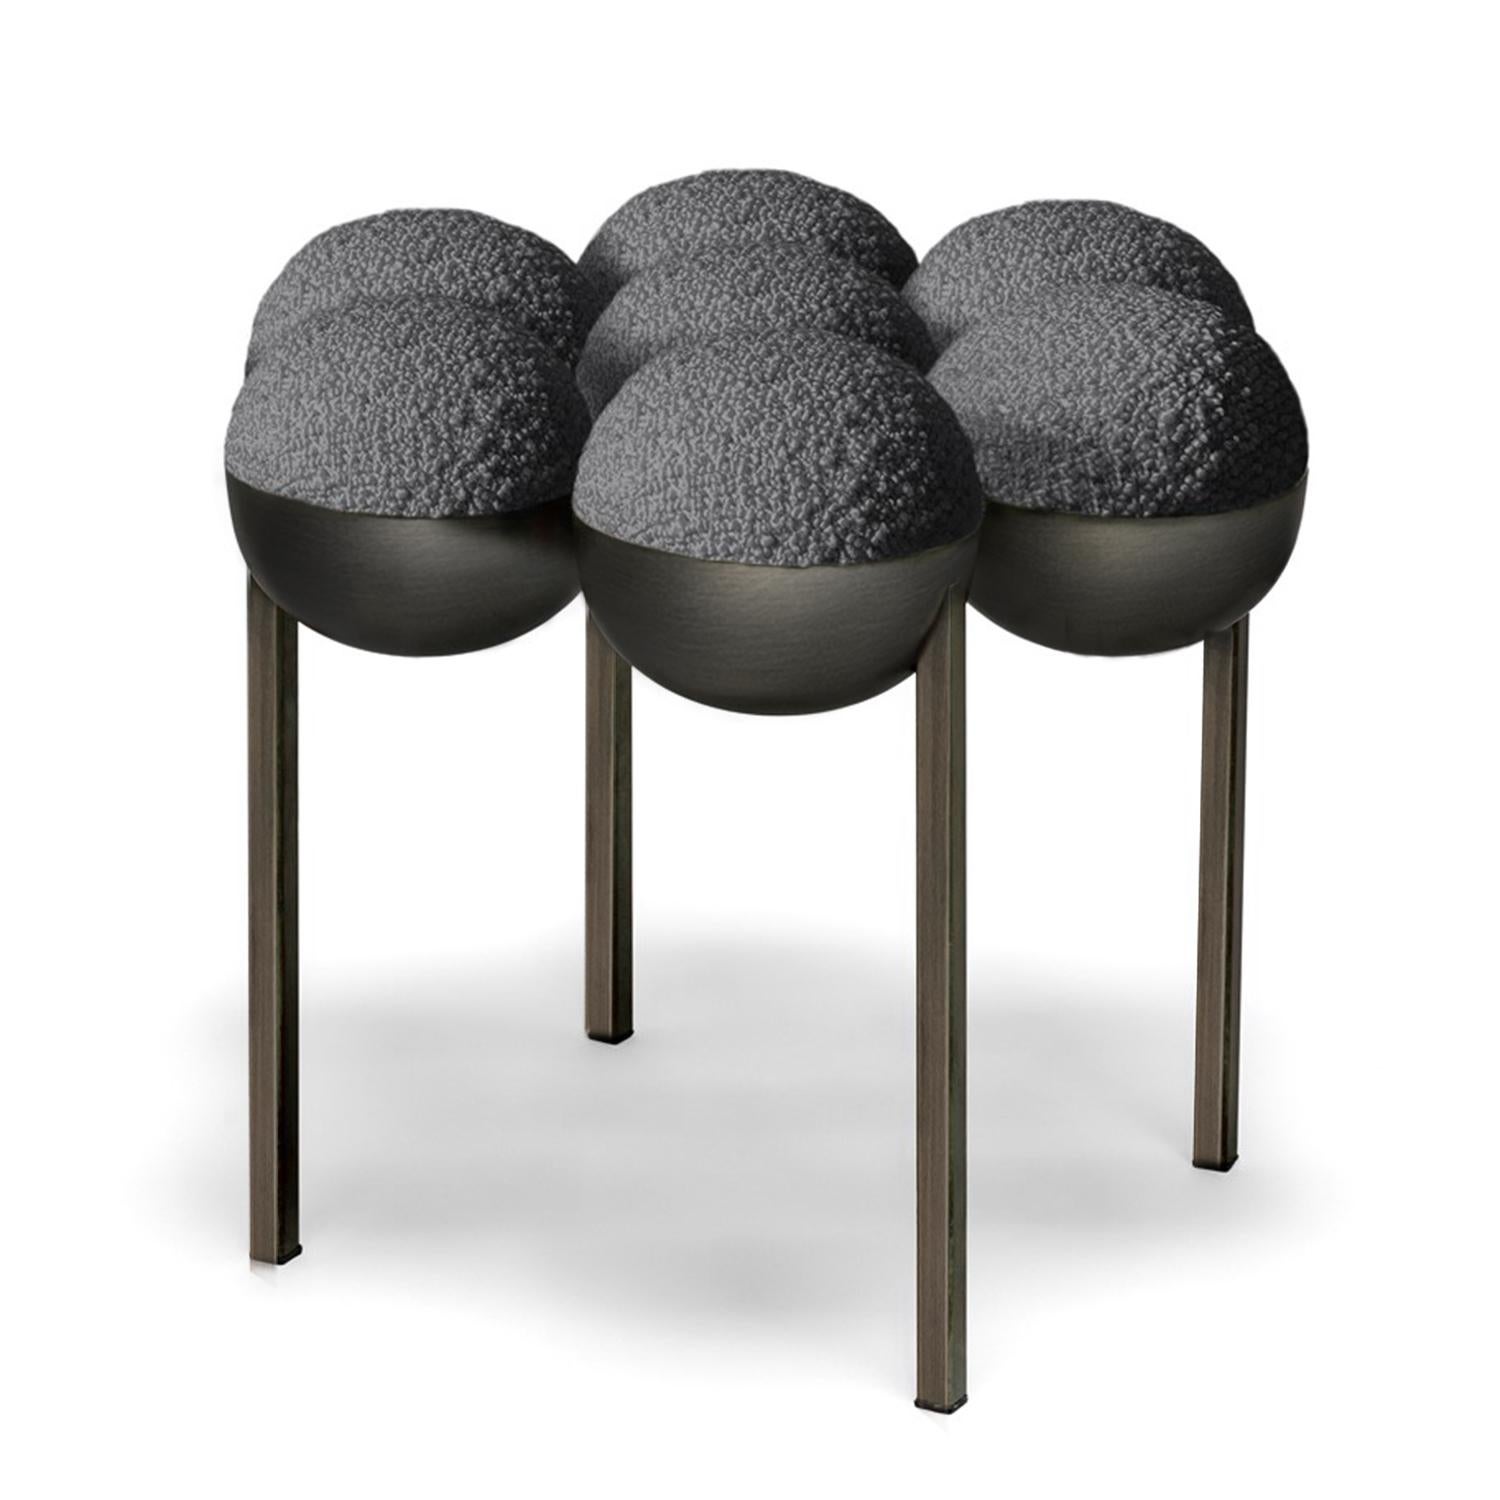 The small Saturn pouffe utilises the same gathered bilboquet seat construction as Saturn chair. The sumptuously undulating seat instantly appeals with its invitingly upholstered comfort, while the graceful supporting metalwork establishes the sense